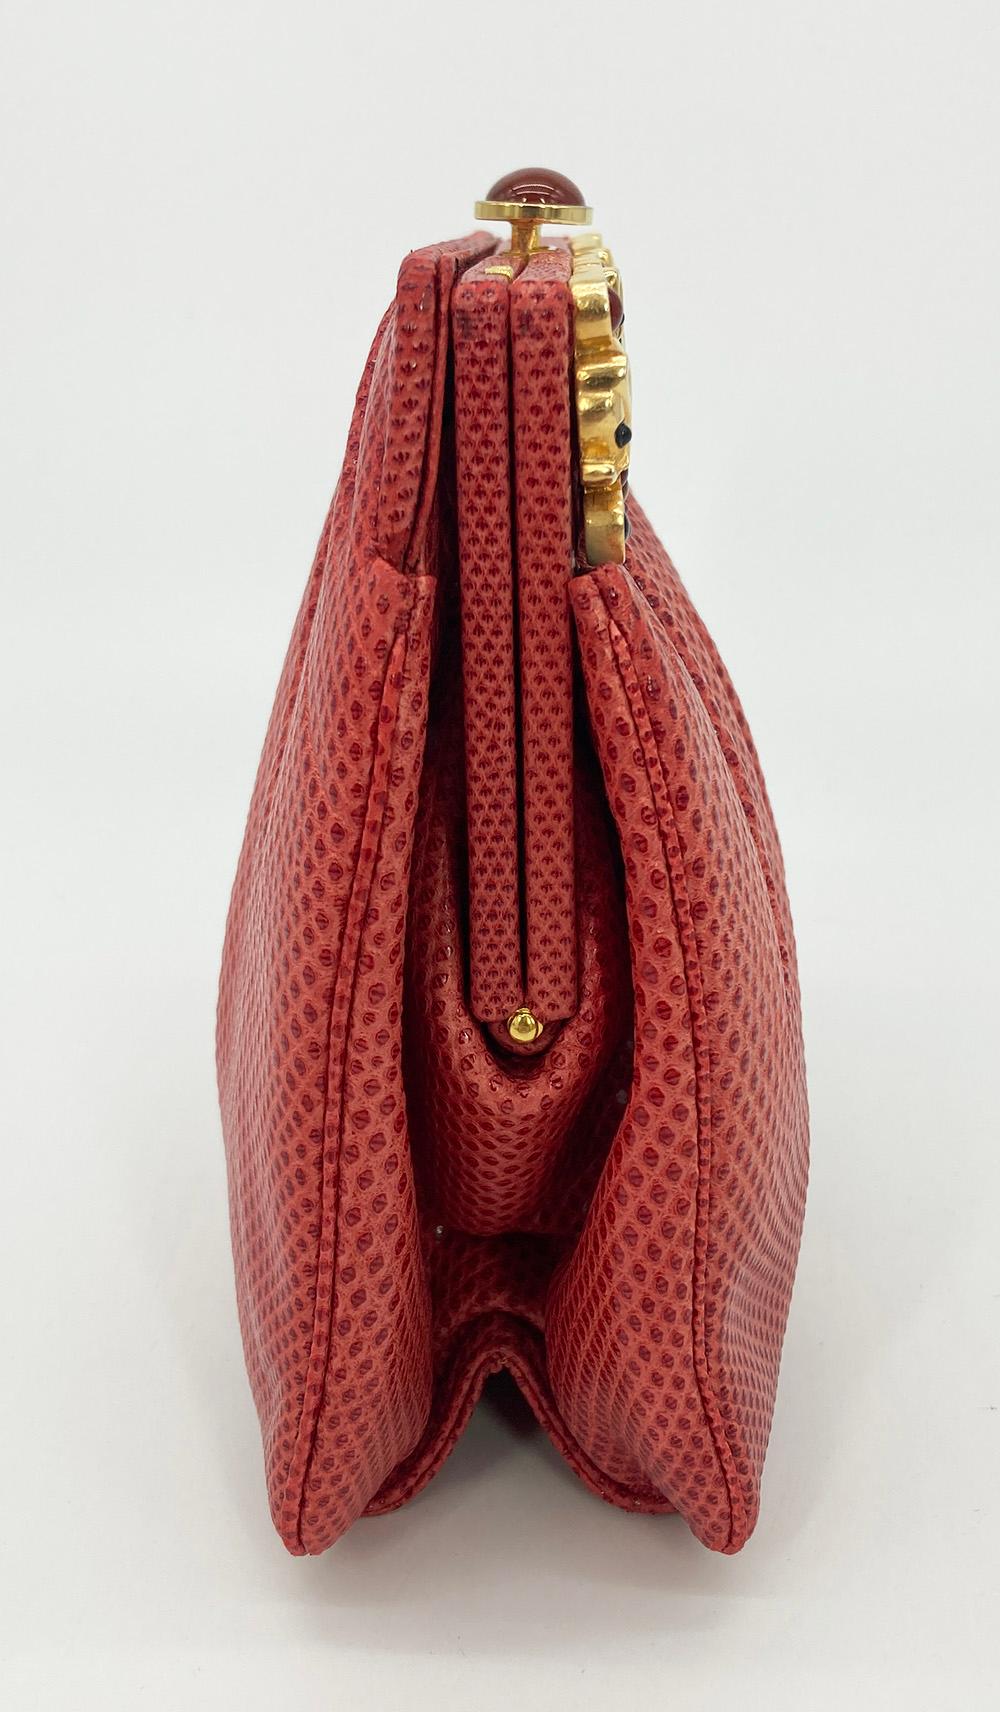 Vintage Judith Leiber Red Lizard Clutch in very good condition. red lizard exterior trimmed with gold hardware and unique floral filigree gemstone embellished front top. Top button closure opens to a red nylon interior with one zip and one slit side